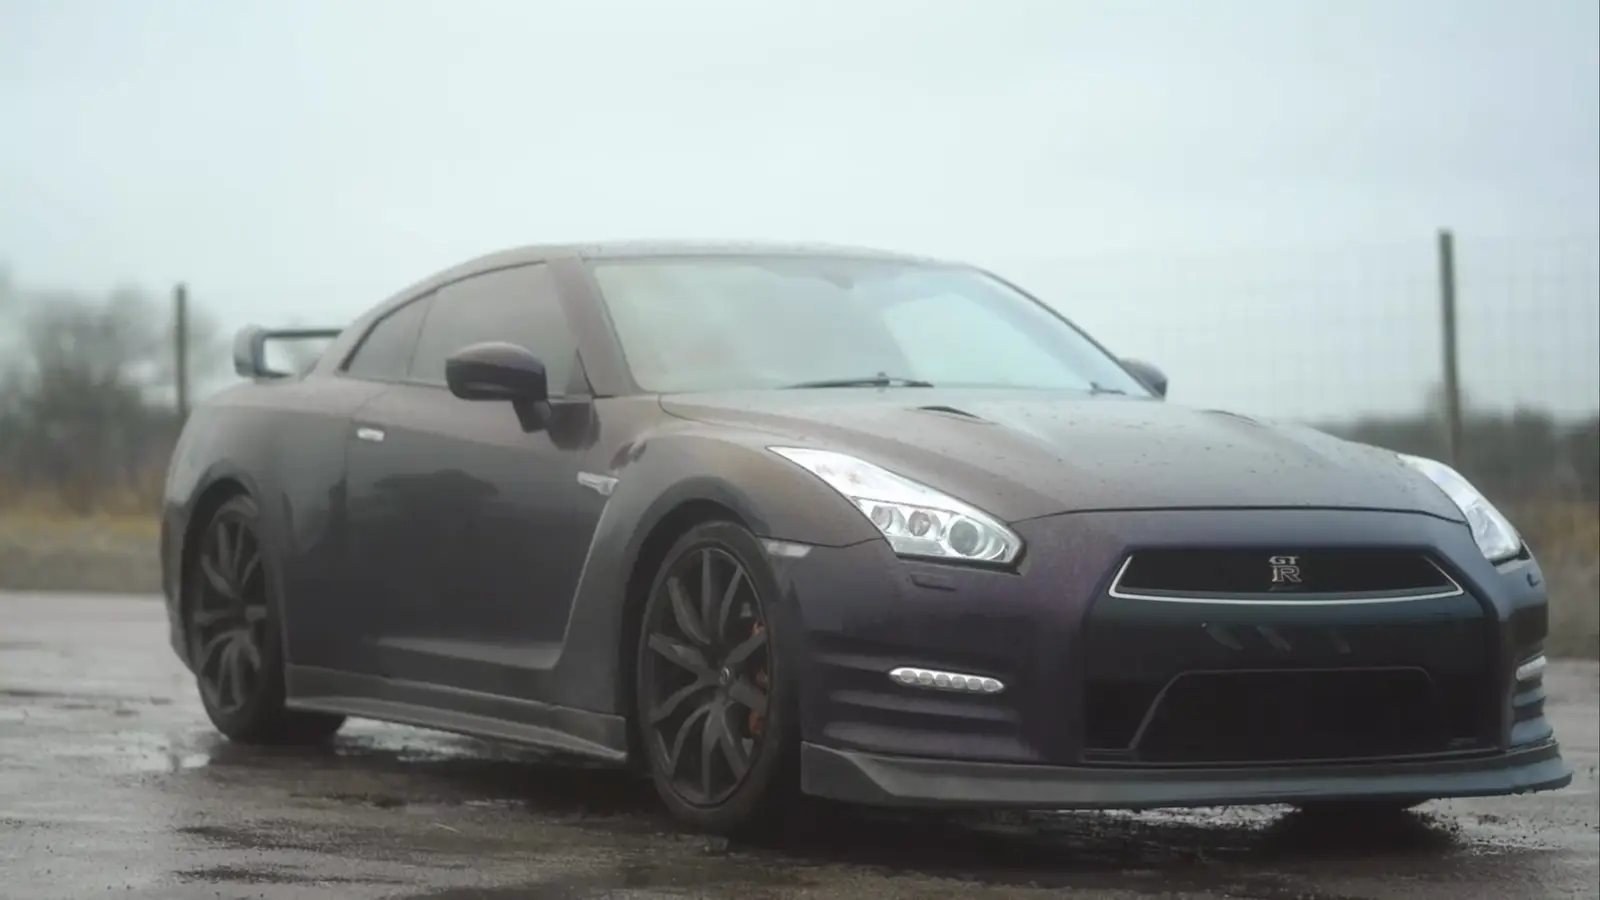 Video: 2 x Tuning Nissan GT-R vs. Mercedes-AMG E63S T-Modell!